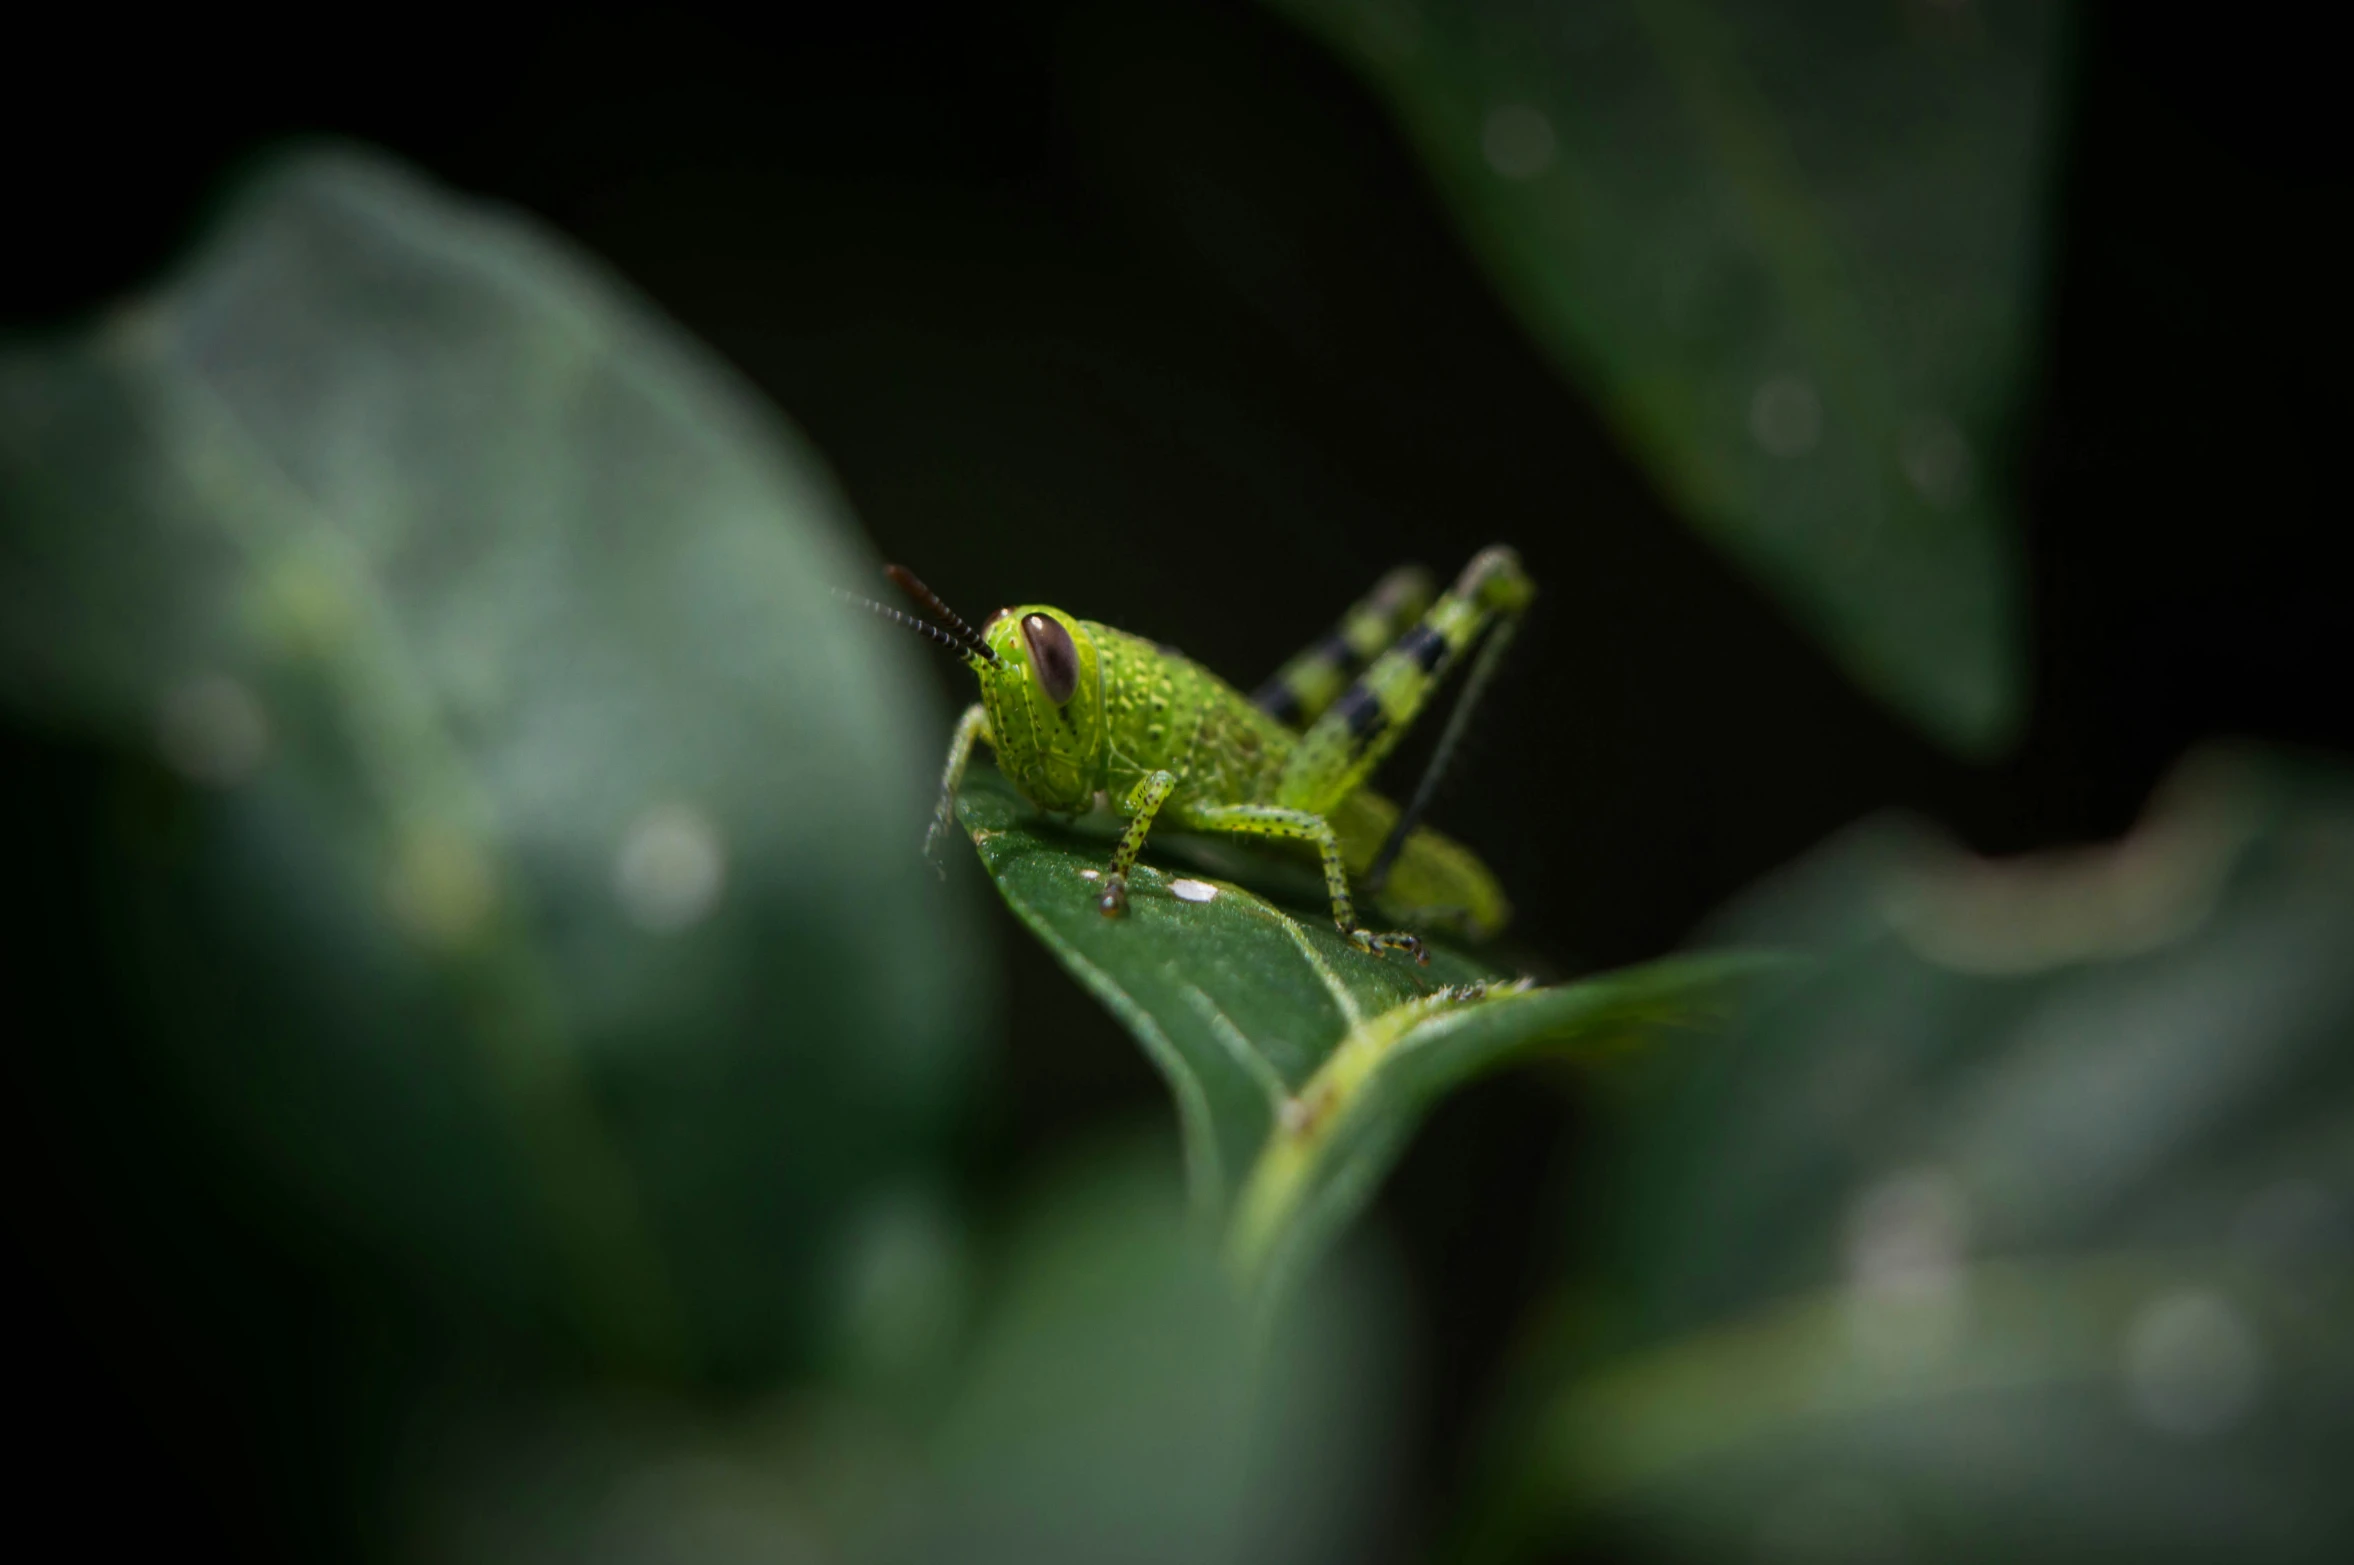 the grasshopper sits on a leaf in its natural environment